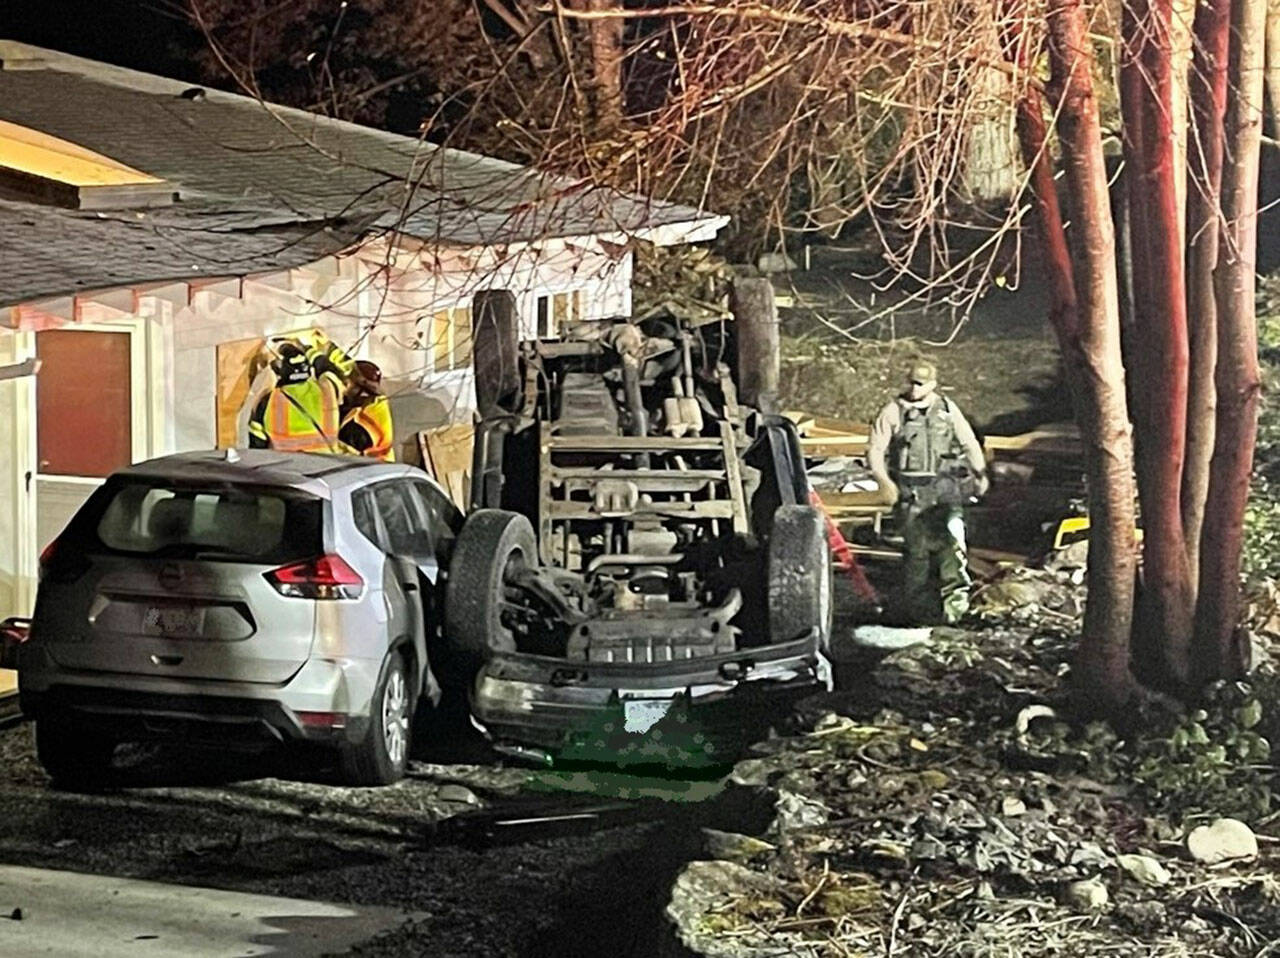 Firefighters work to board up a broken window while a sheriff’s deputy investigates the scene after a pickup came off of West Kingston Road, injuring its driver and causing significant damage to a home and an adjacent parked car Nov. 10. Courtesy Photo